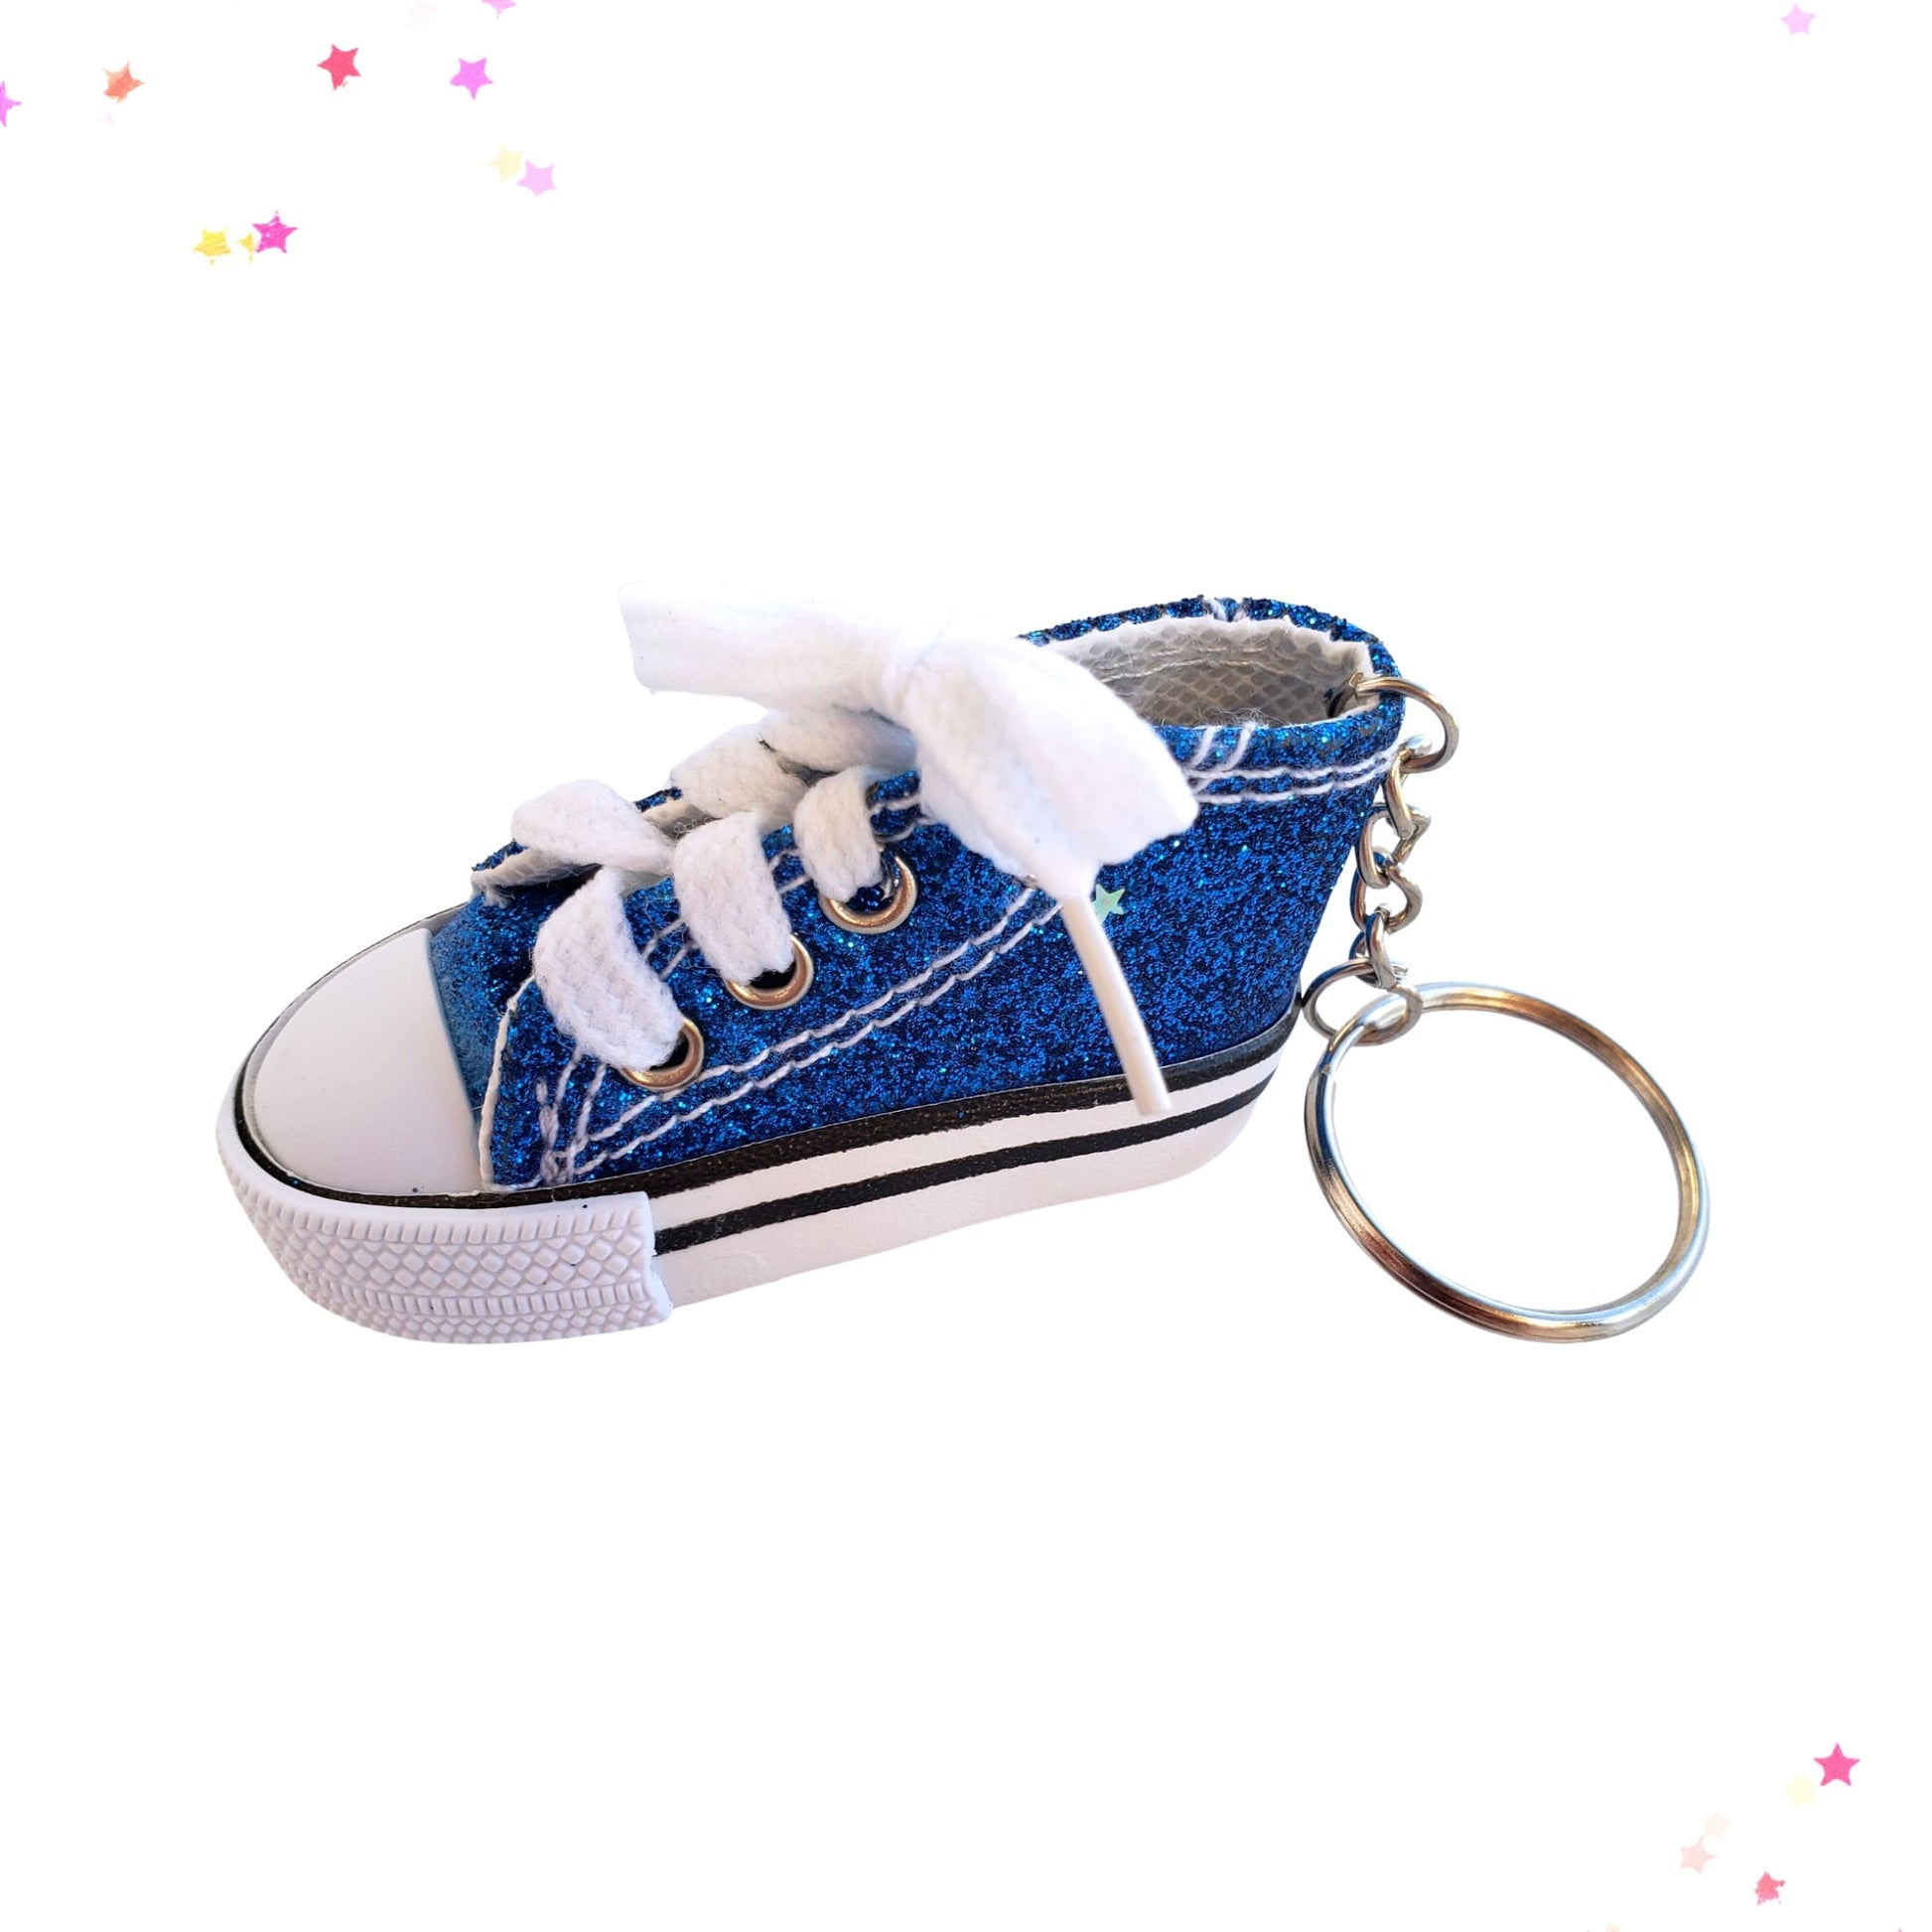 Glittery High Top Sneaker Shoe Keychain Bag Charm from Confetti Kitty, Only 9.99